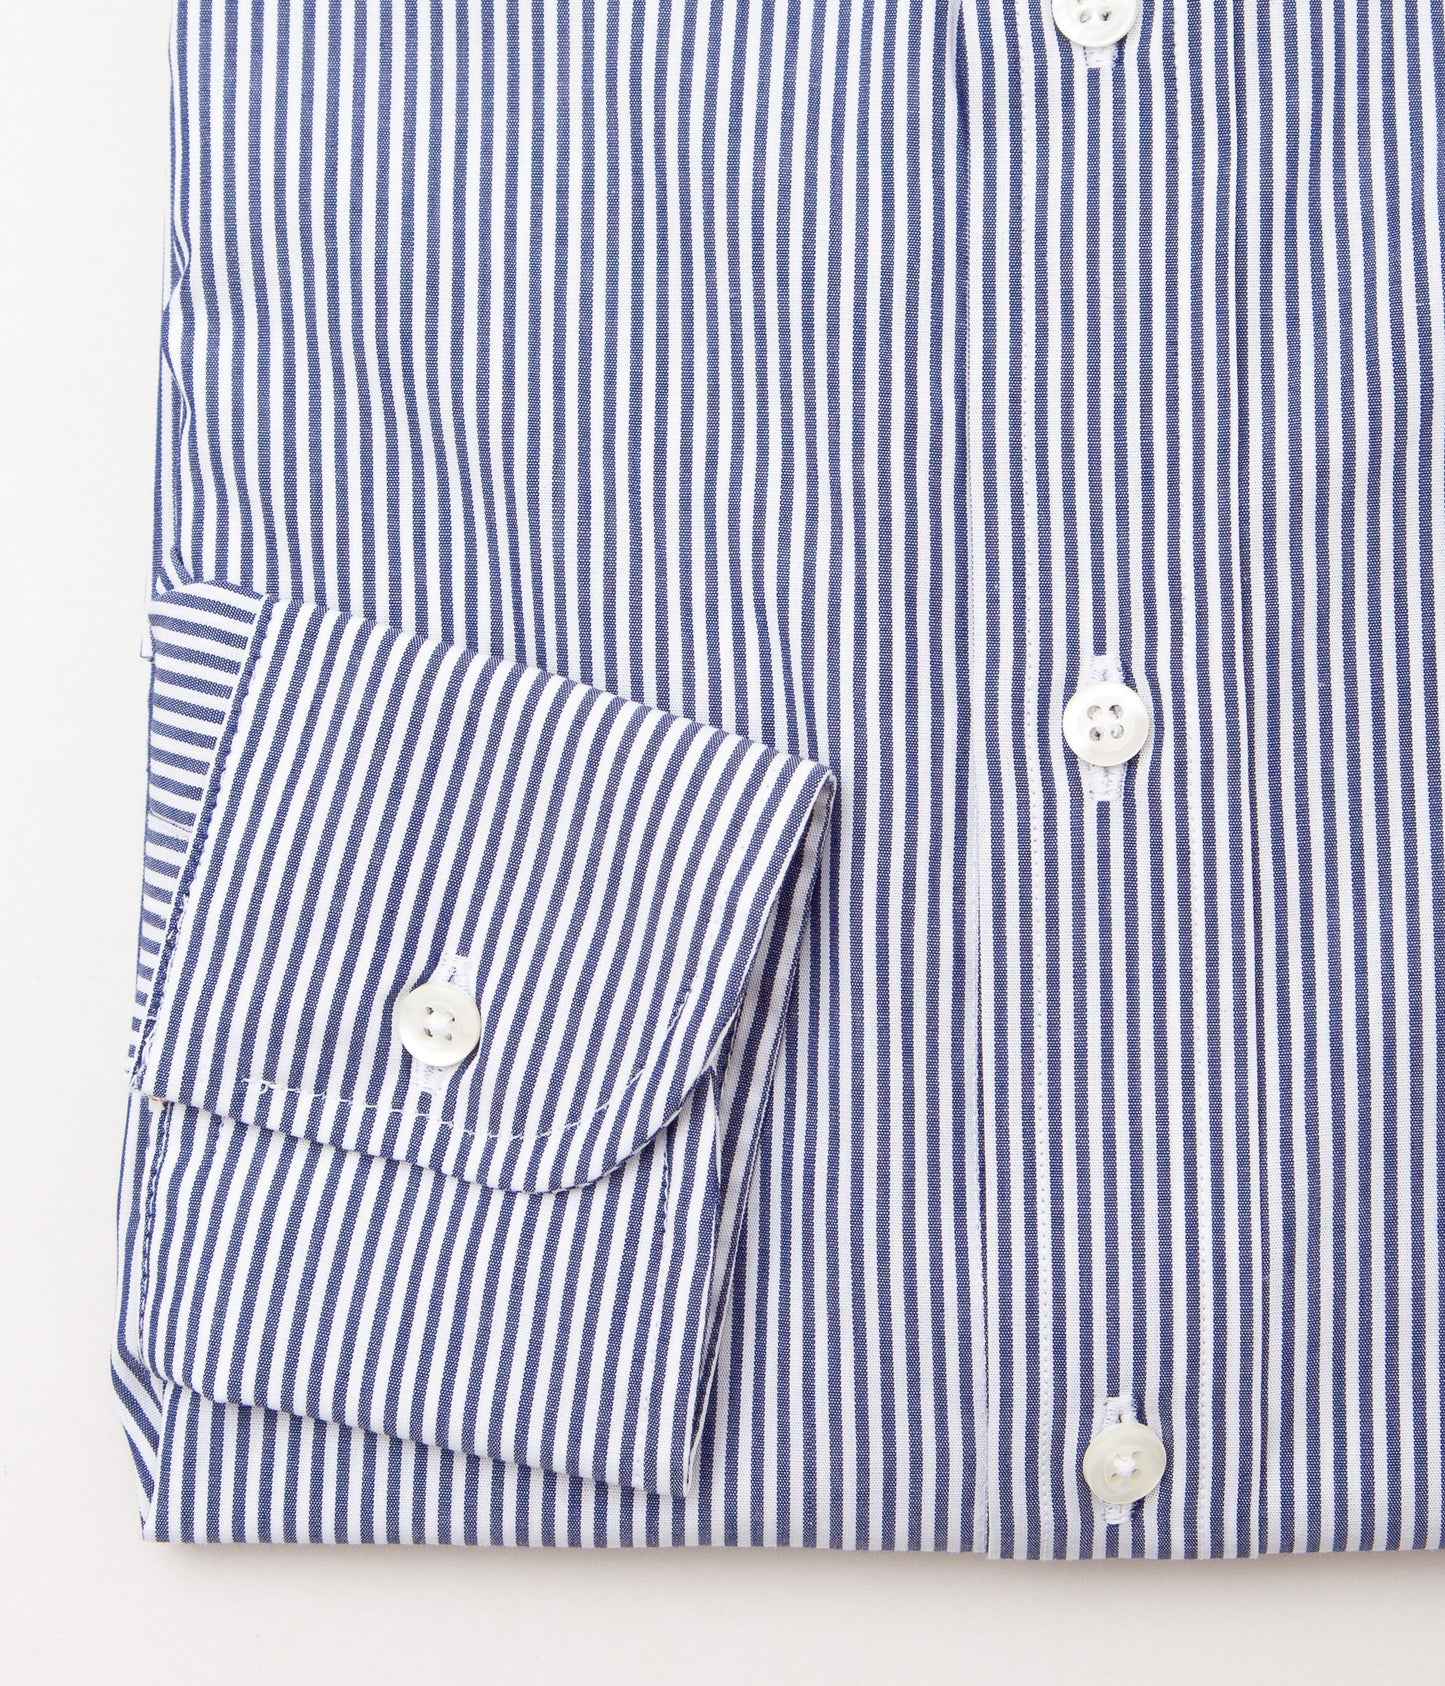 INDIVIDUALIZED SHIRTS "BENGAL STRIPE RELAXED FIT TRADITIONAL COLLAR SHIRT" (NAVY)